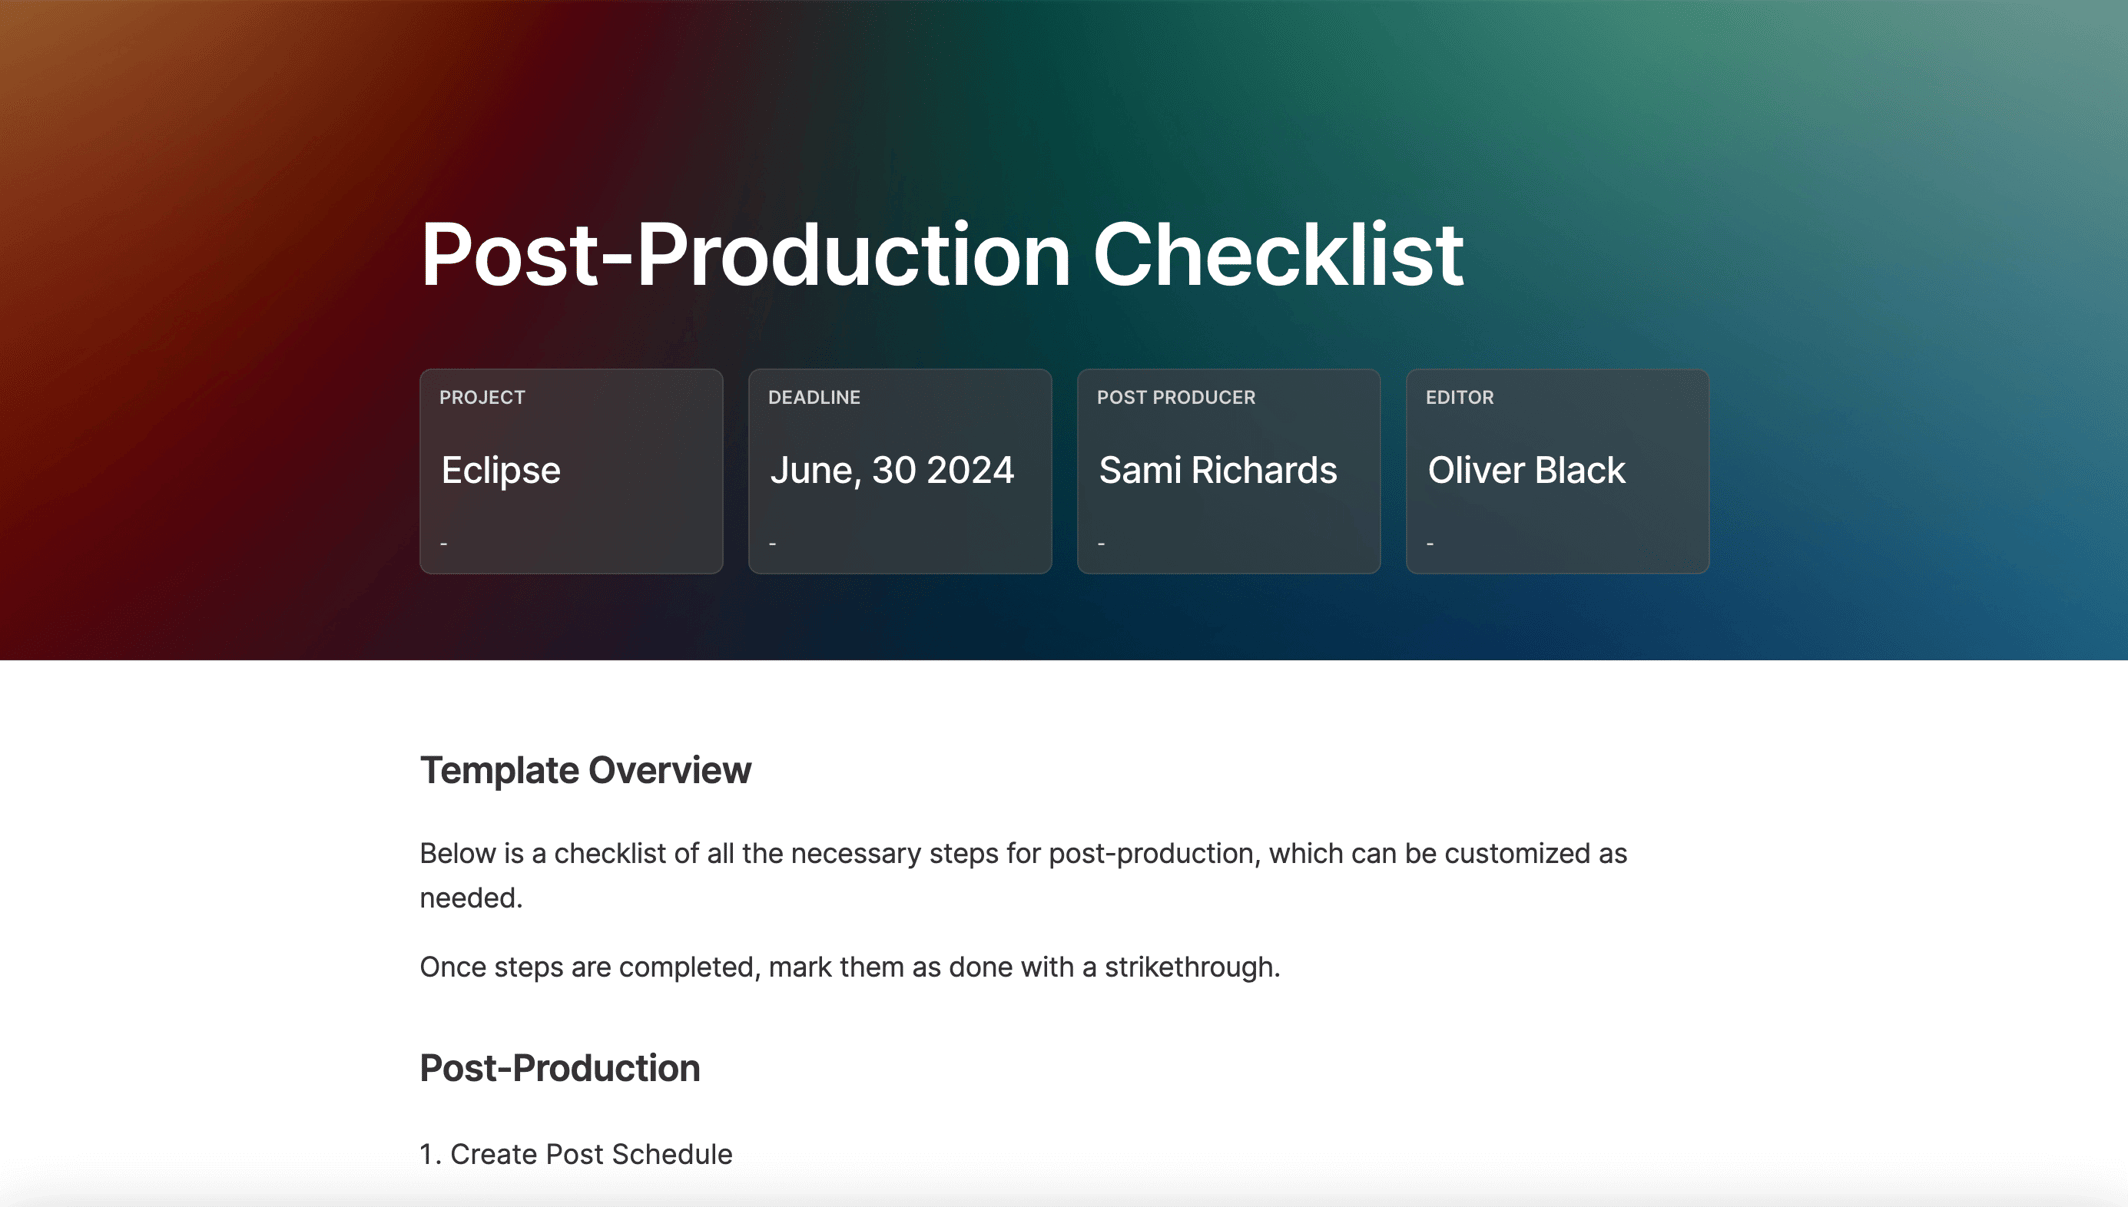 https://3389140.fs1.hubspotusercontent-na1.net/hubfs/3389140/post%20production%20checklist%20cover.png